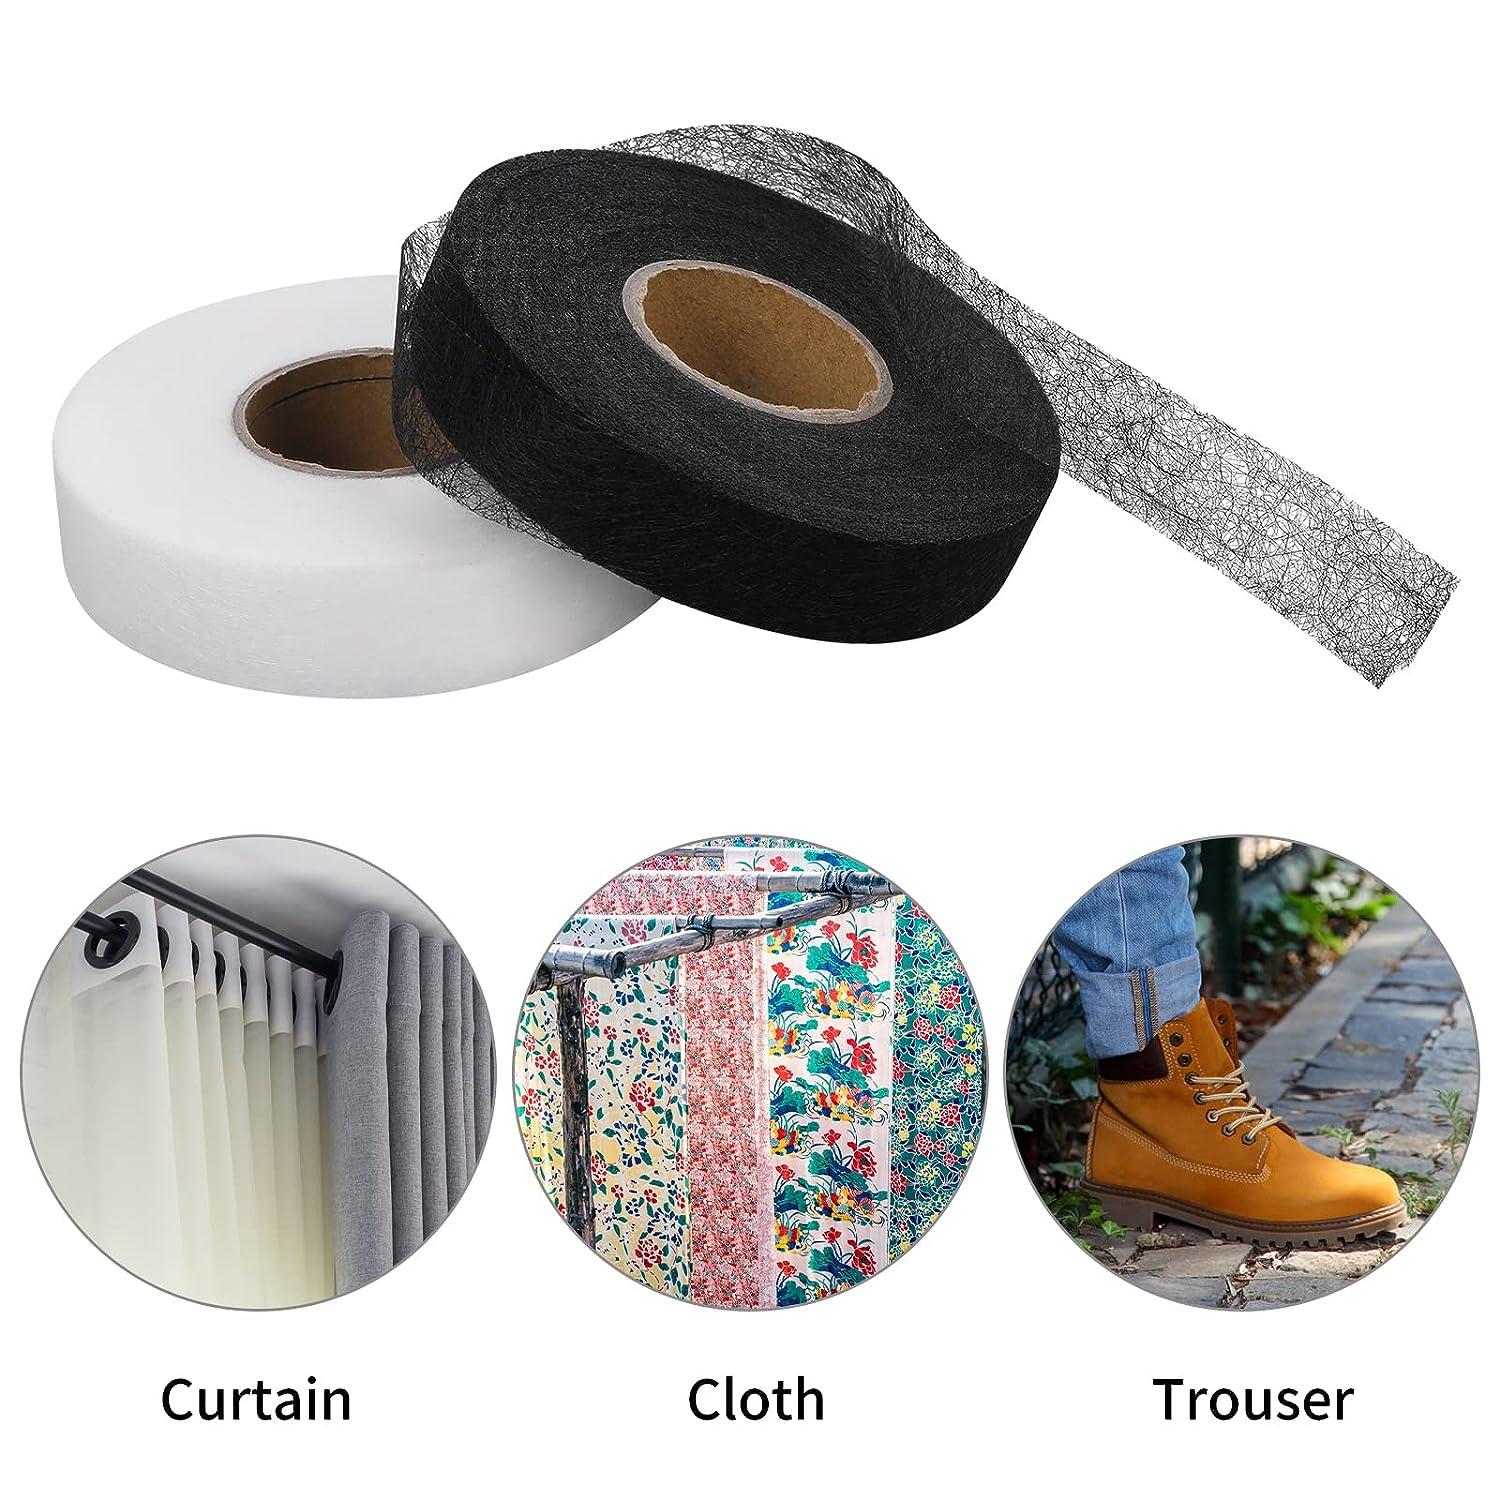 Prasacco 2 Rolls Hem Tape, Iron on Hemming Tape for Pants, No Sew Hemming  Tape with Soft Ruler, Fabric Tape for Clothes Jeans Dresses Pants, Each 60  Yards, 2cm, Black White